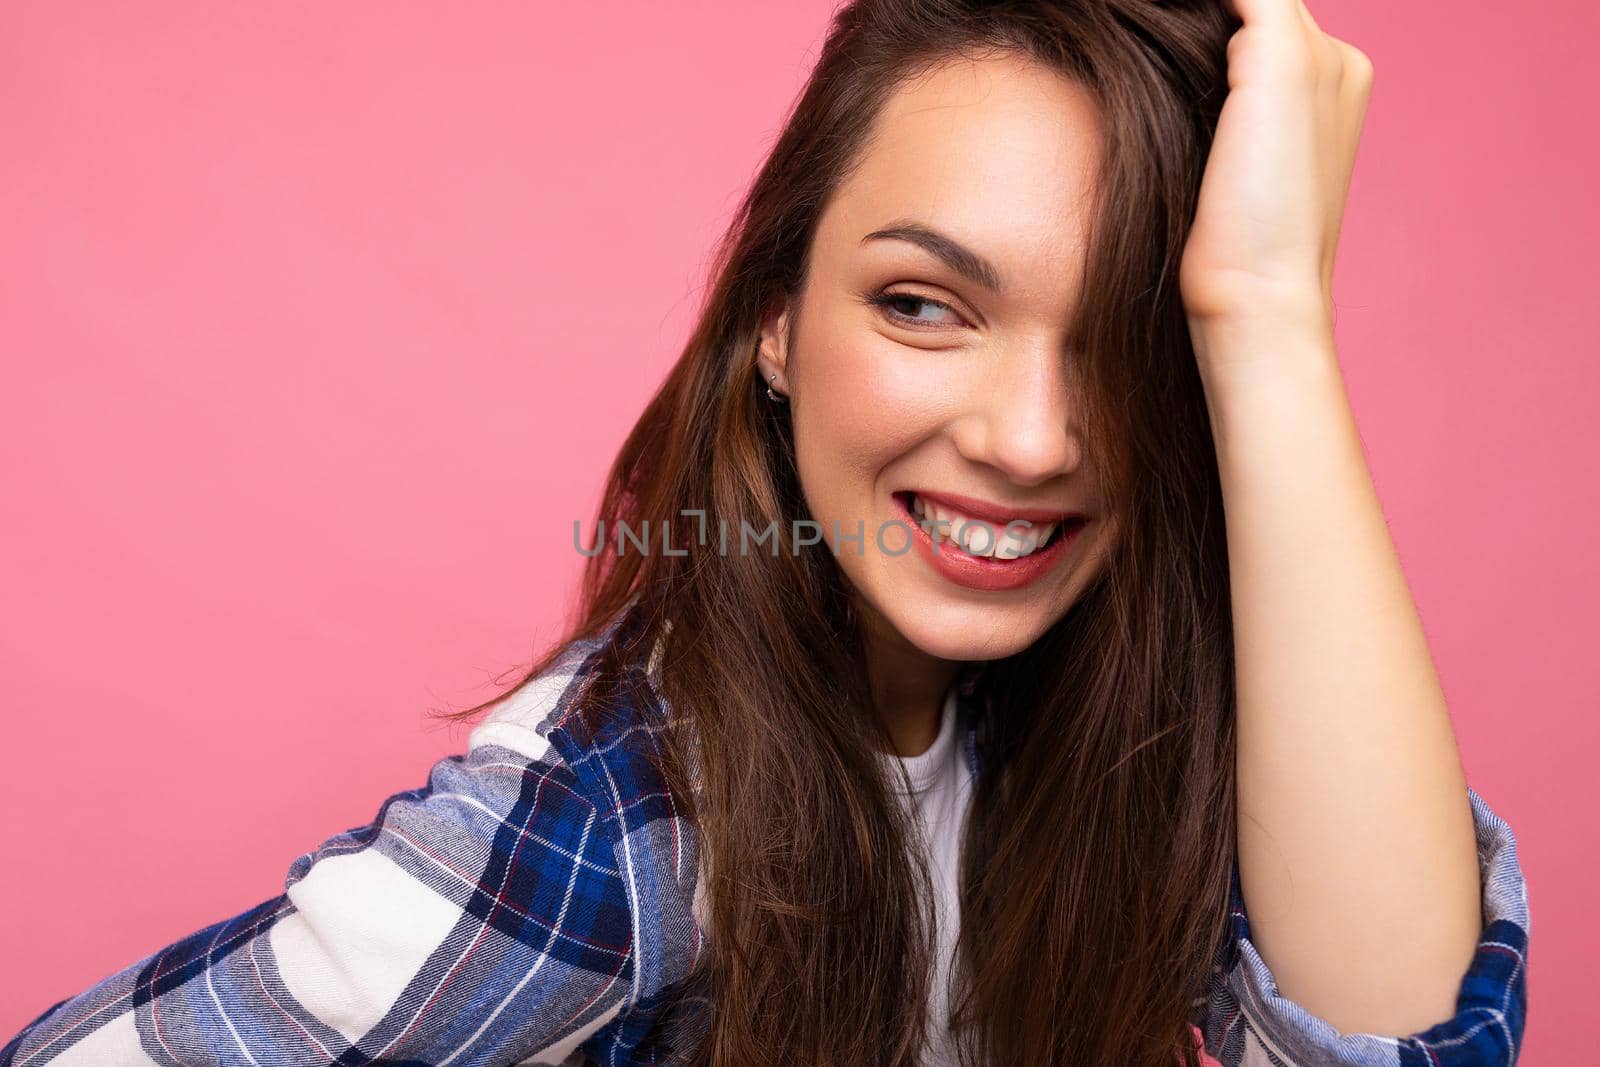 Portrait of positive cheerful fashionable woman in hipster outfit isolated on pink background with copy space.